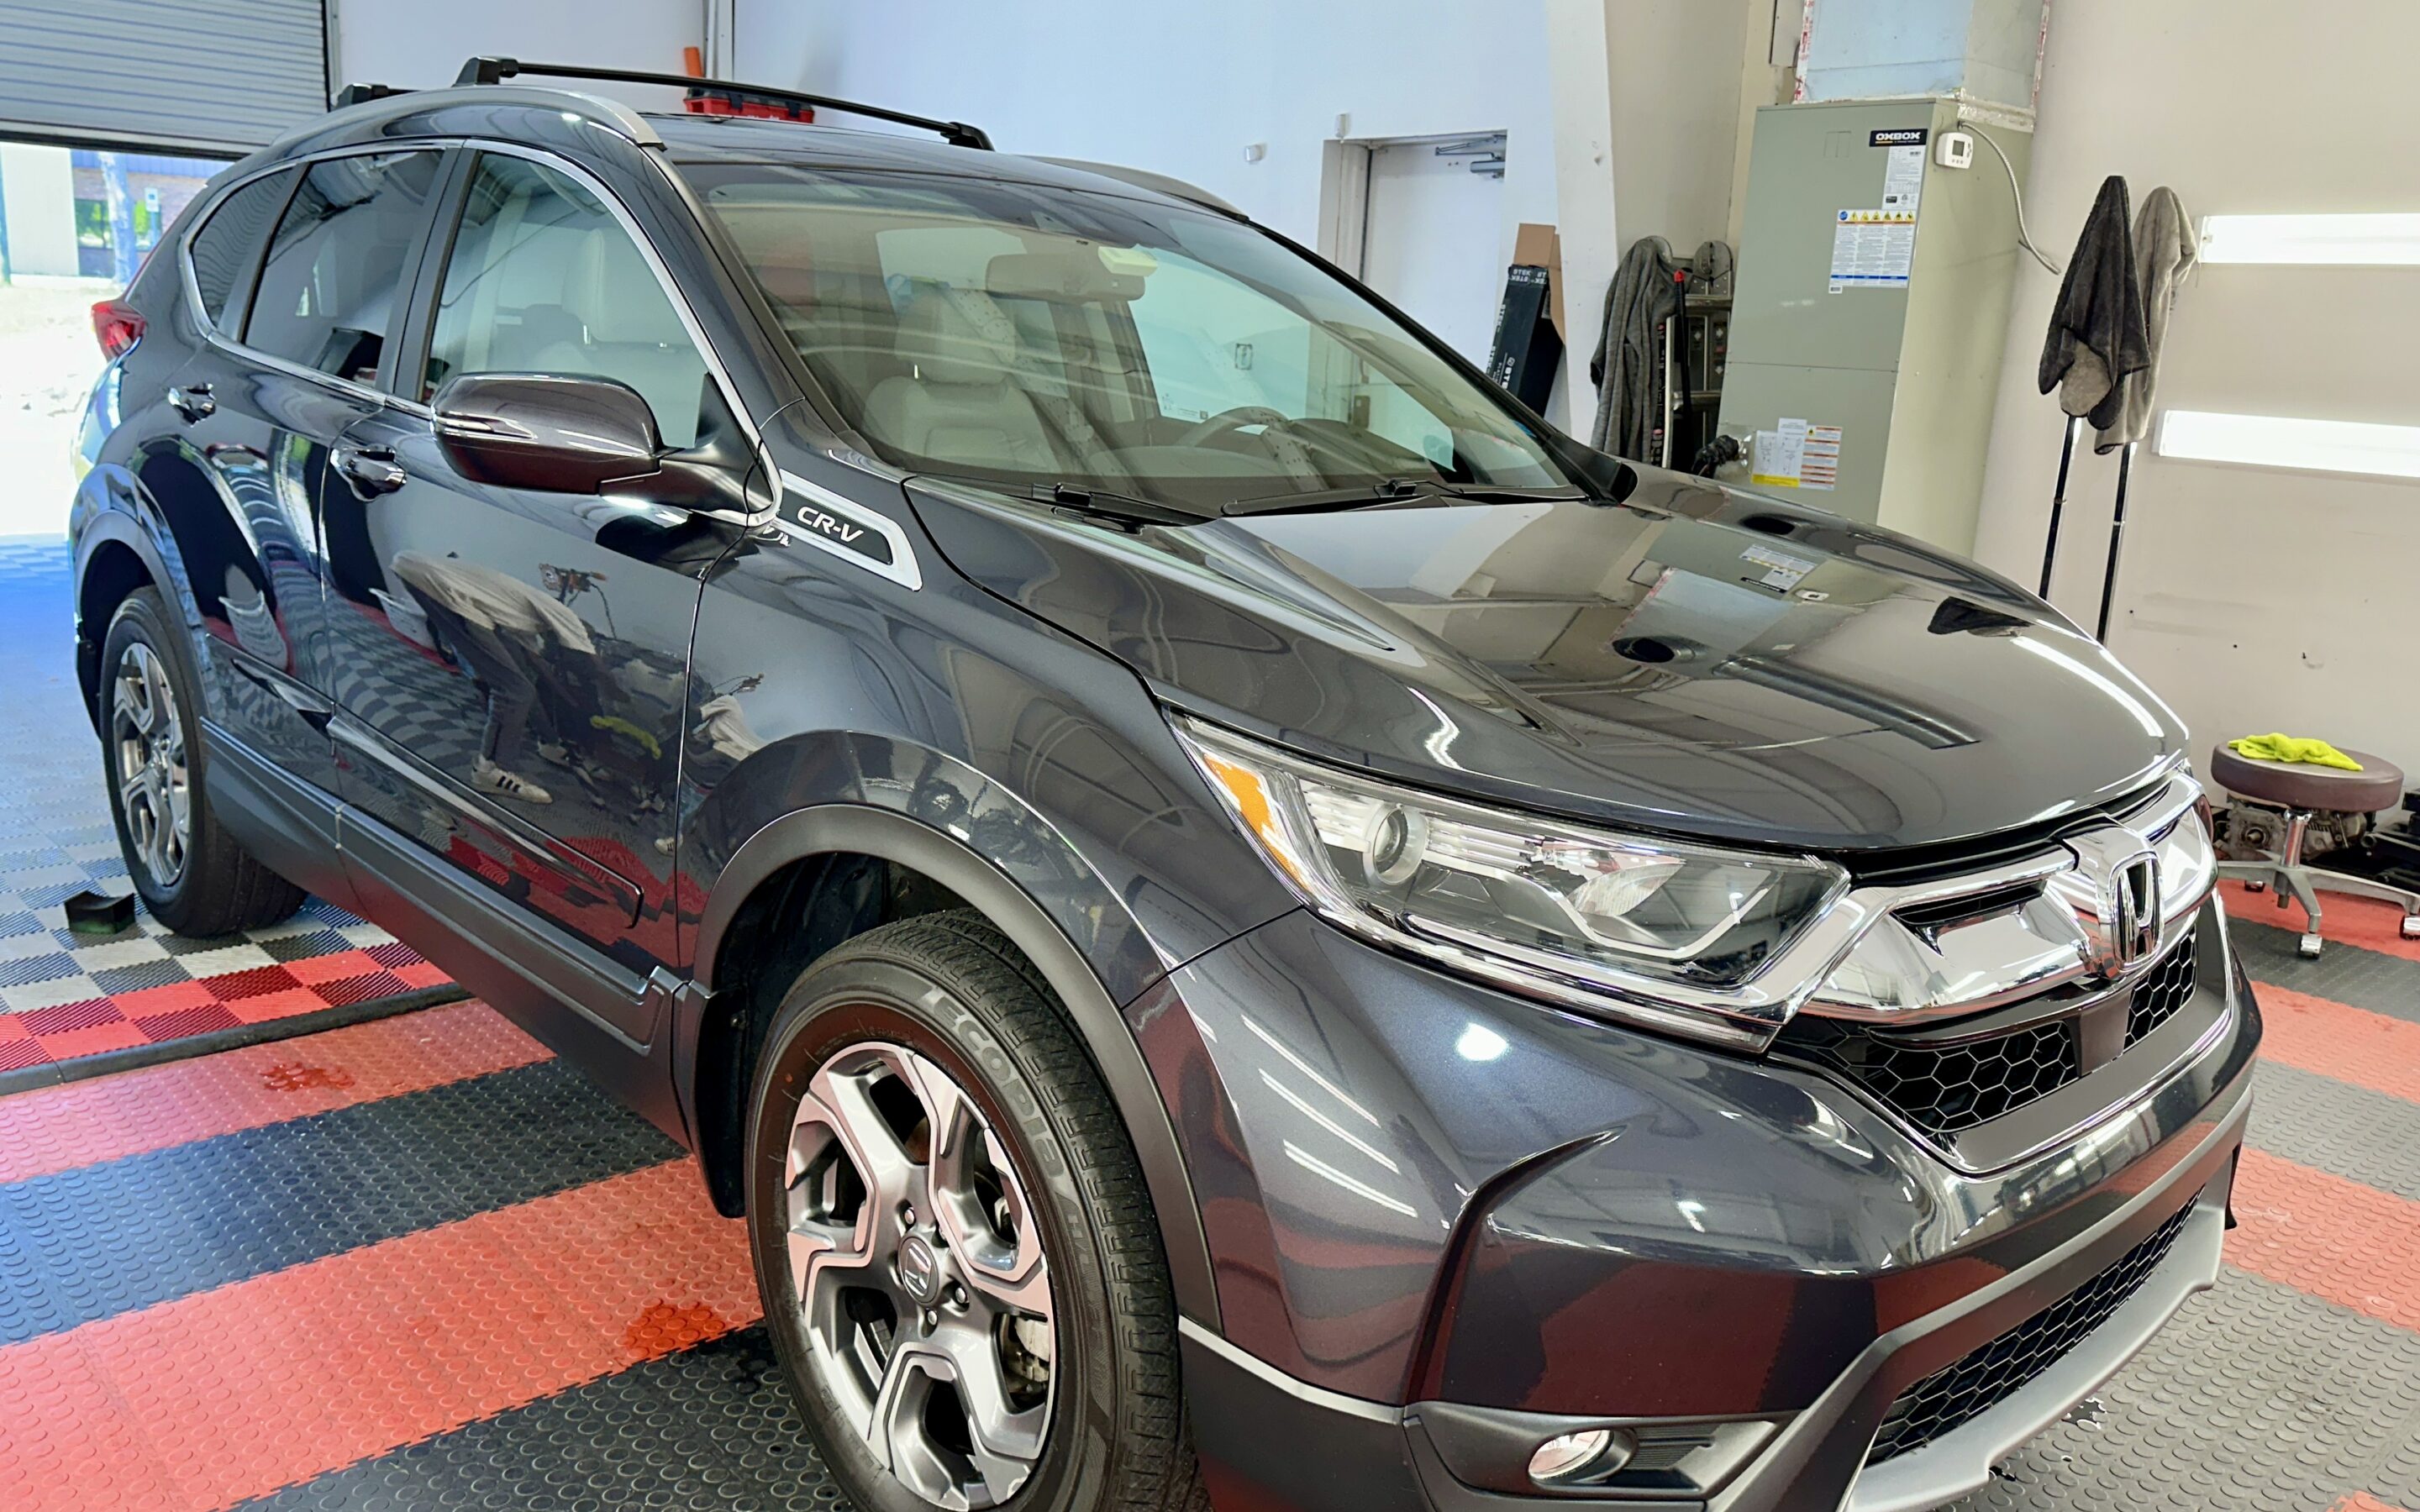 Enhancing Your Honda with Professional Ceramic Coating Services at August Precision